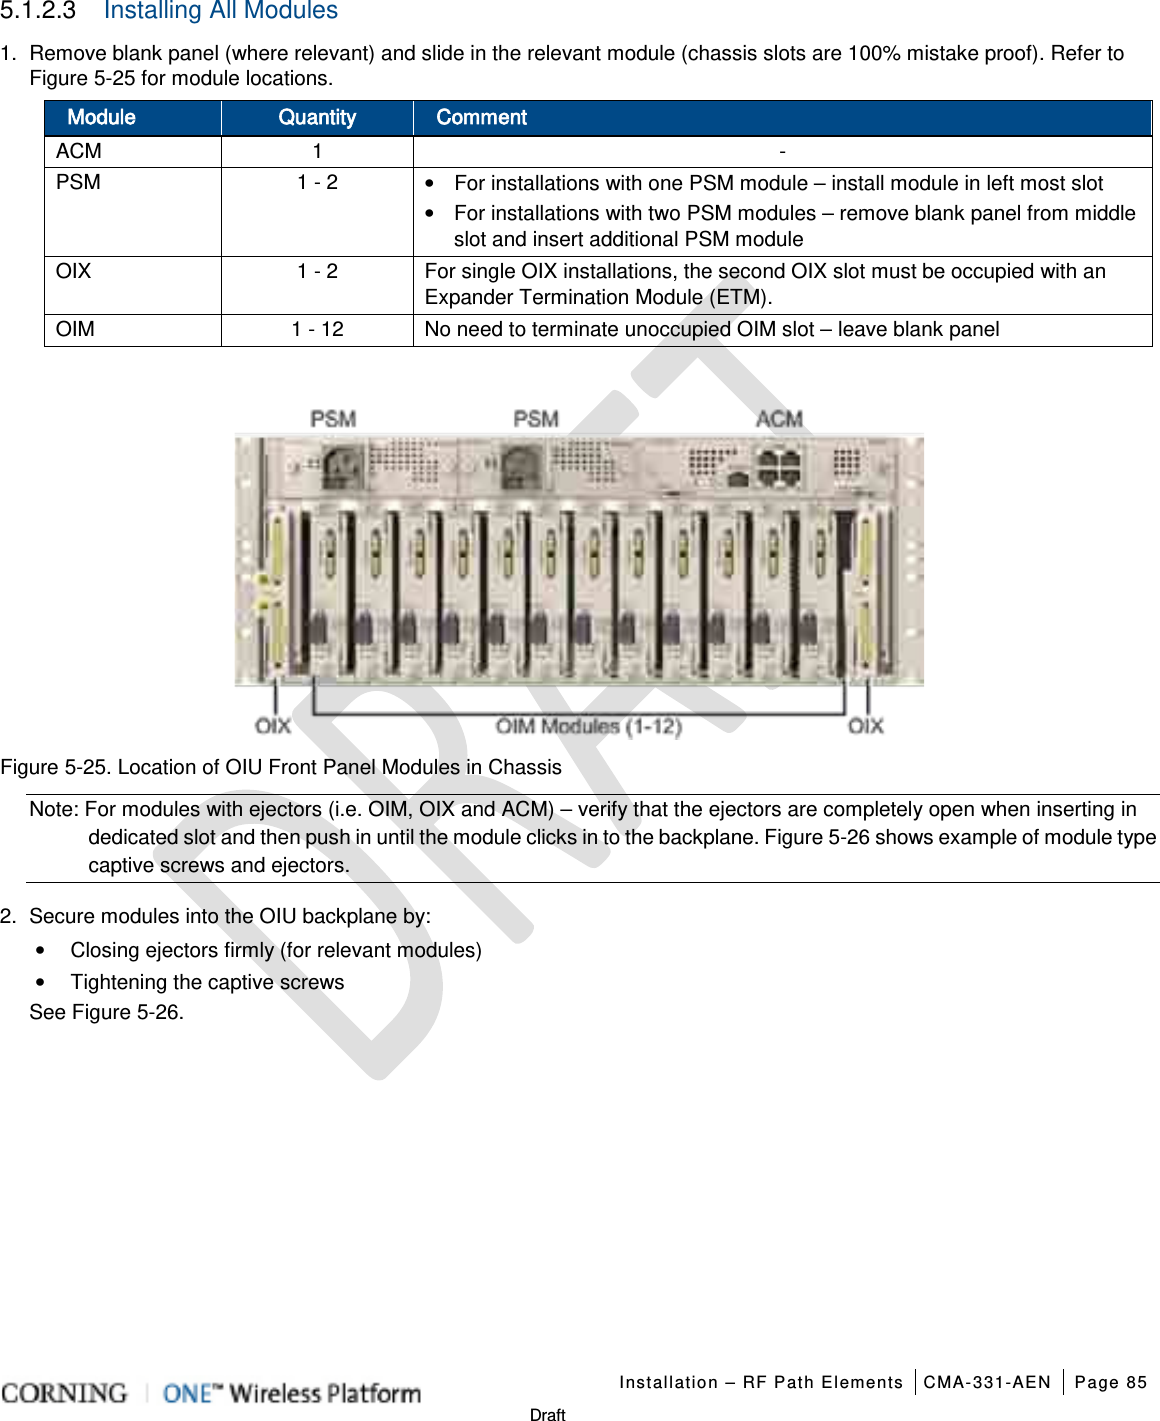   Installation – RF Path Elements CMA-331-AEN Page 85   Draft 5.1.2.3  Installing All Modules  1.  Remove blank panel (where relevant) and slide in the relevant module (chassis slots are 100% mistake proof). Refer to Figure  5-25 for module locations.   Module Quantity Comment ACM    1  - PSM 1 - 2  • For installations with one PSM module – install module in left most slot • For installations with two PSM modules – remove blank panel from middle slot and insert additional PSM module OIX 1 - 2  For single OIX installations, the second OIX slot must be occupied with an Expander Termination Module (ETM). OIM 1 - 12 No need to terminate unoccupied OIM slot – leave blank panel     Figure  5-25. Location of OIU Front Panel Modules in Chassis Note: For modules with ejectors (i.e. OIM, OIX and ACM) – verify that the ejectors are completely open when inserting in dedicated slot and then push in until the module clicks in to the backplane. Figure  5-26 shows example of module type captive screws and ejectors. 2.  Secure modules into the OIU backplane by: • Closing ejectors firmly (for relevant modules) • Tightening the captive screws   See Figure  5-26.   